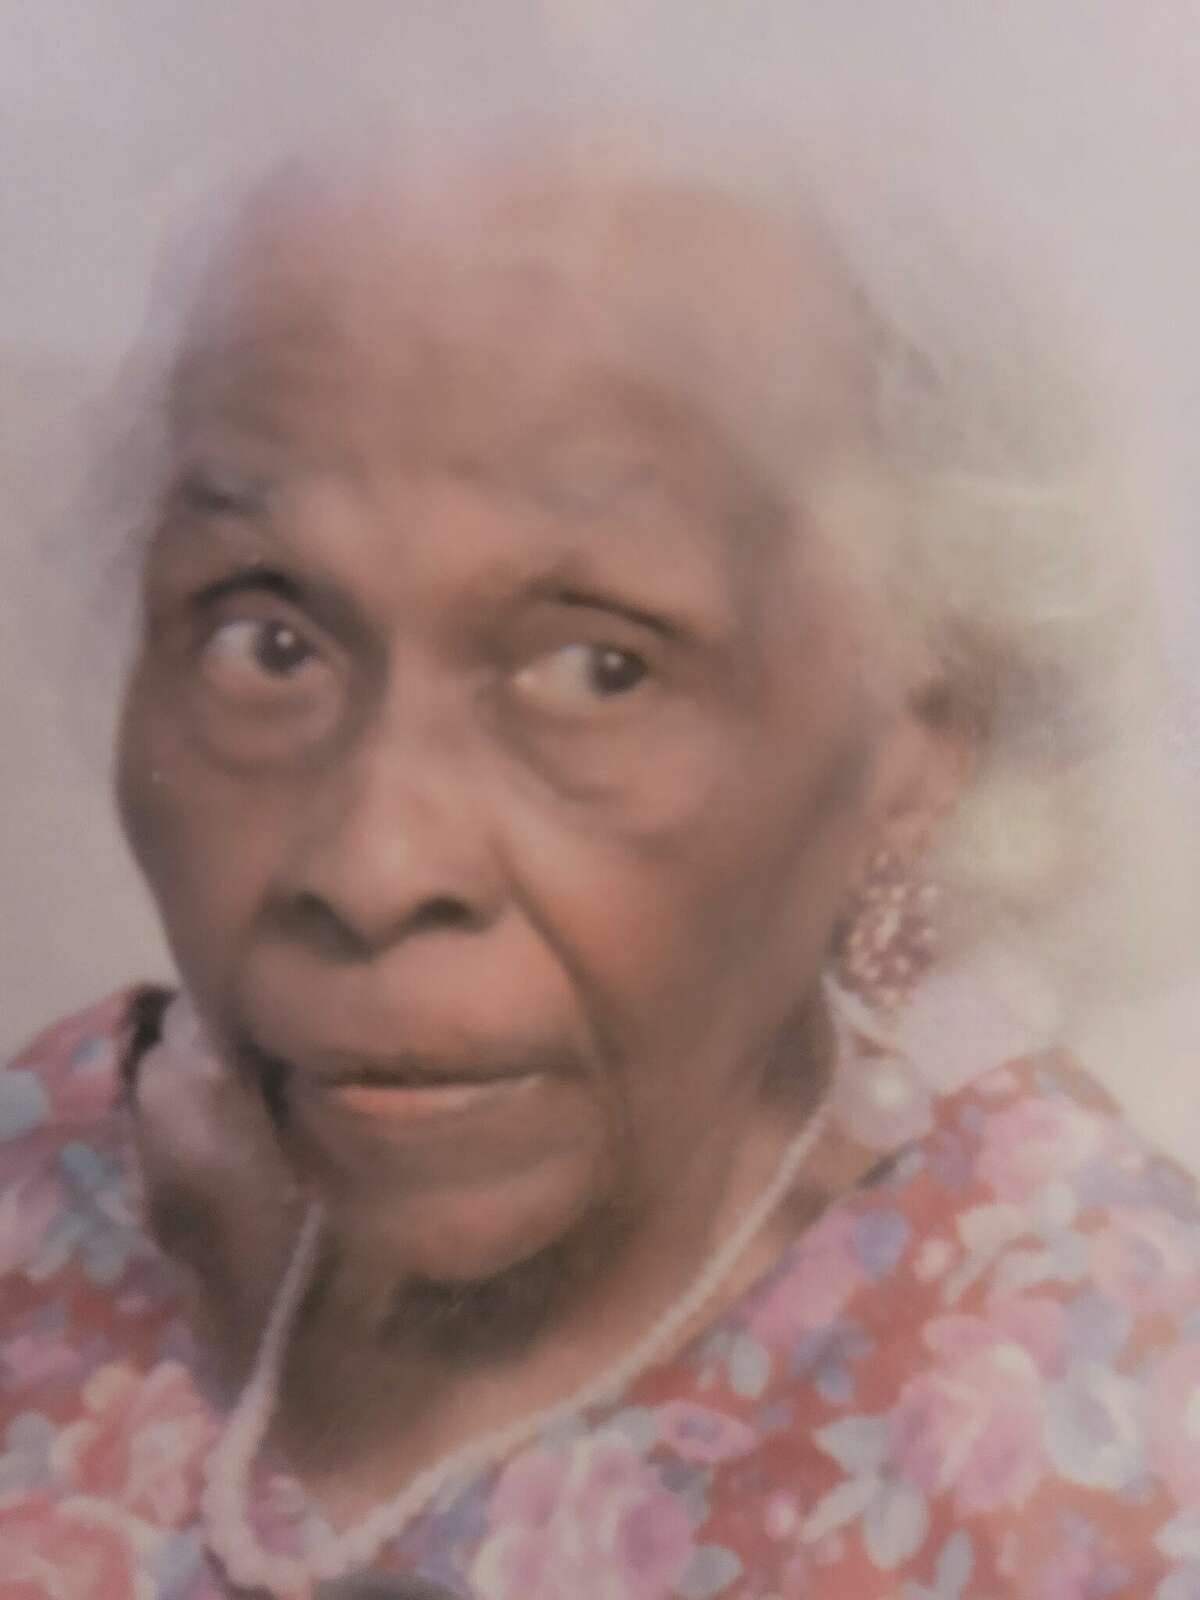 Essie Moore Logan (1905-2000), the grandmother of Rev. Mike Logan, of Godfrey, graduated from Tuskegee Institute. 